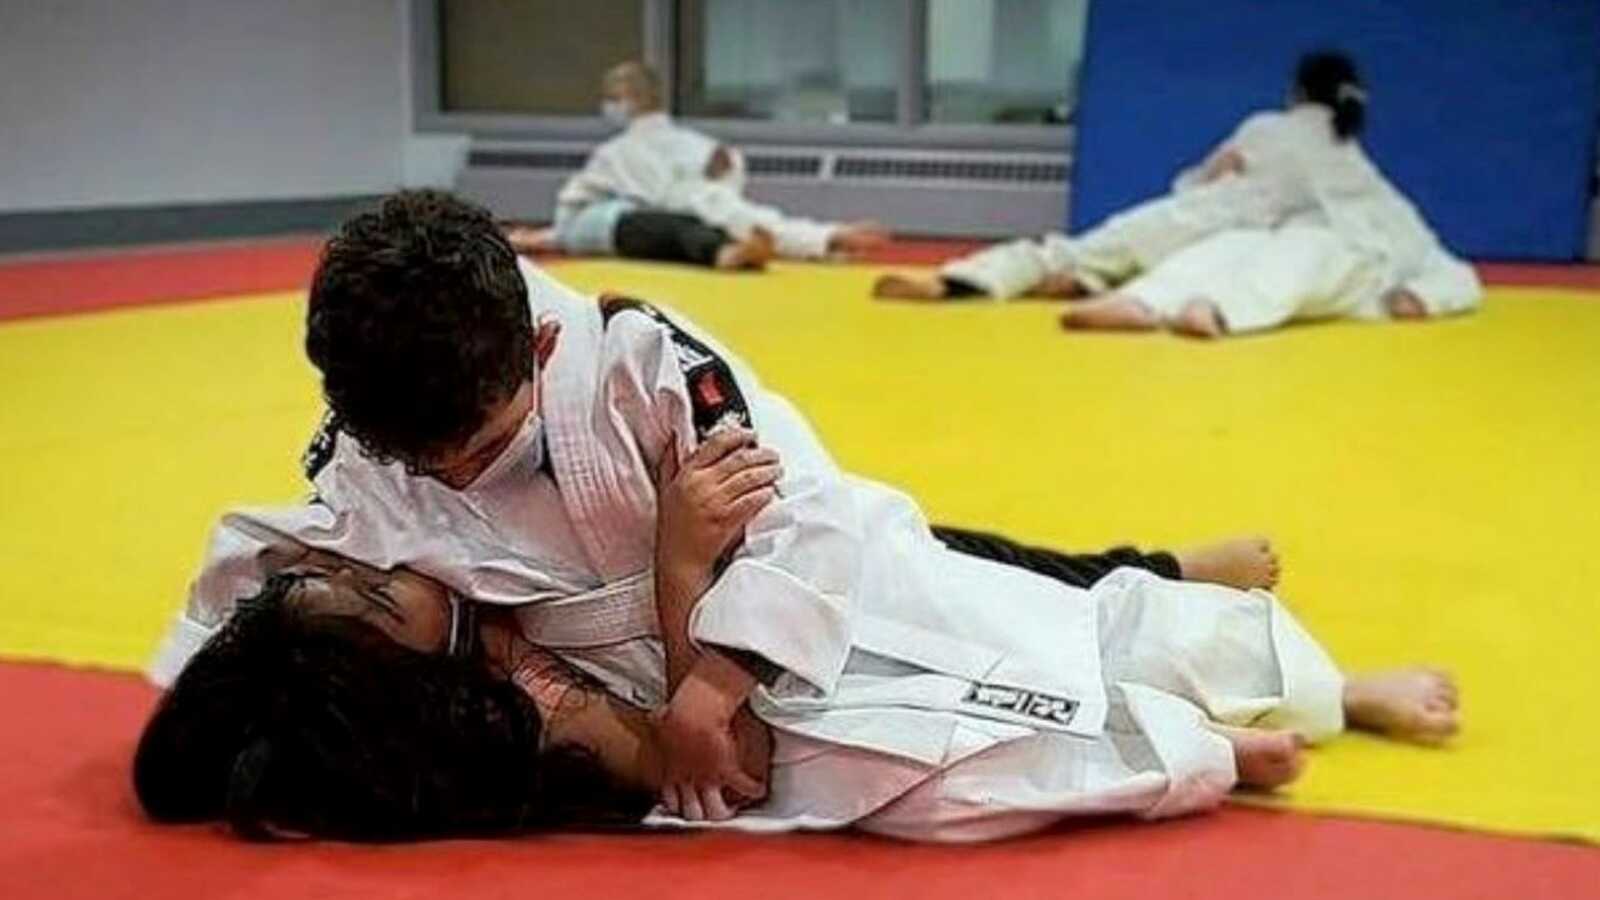 Mom takes a photo of her son practicing judo